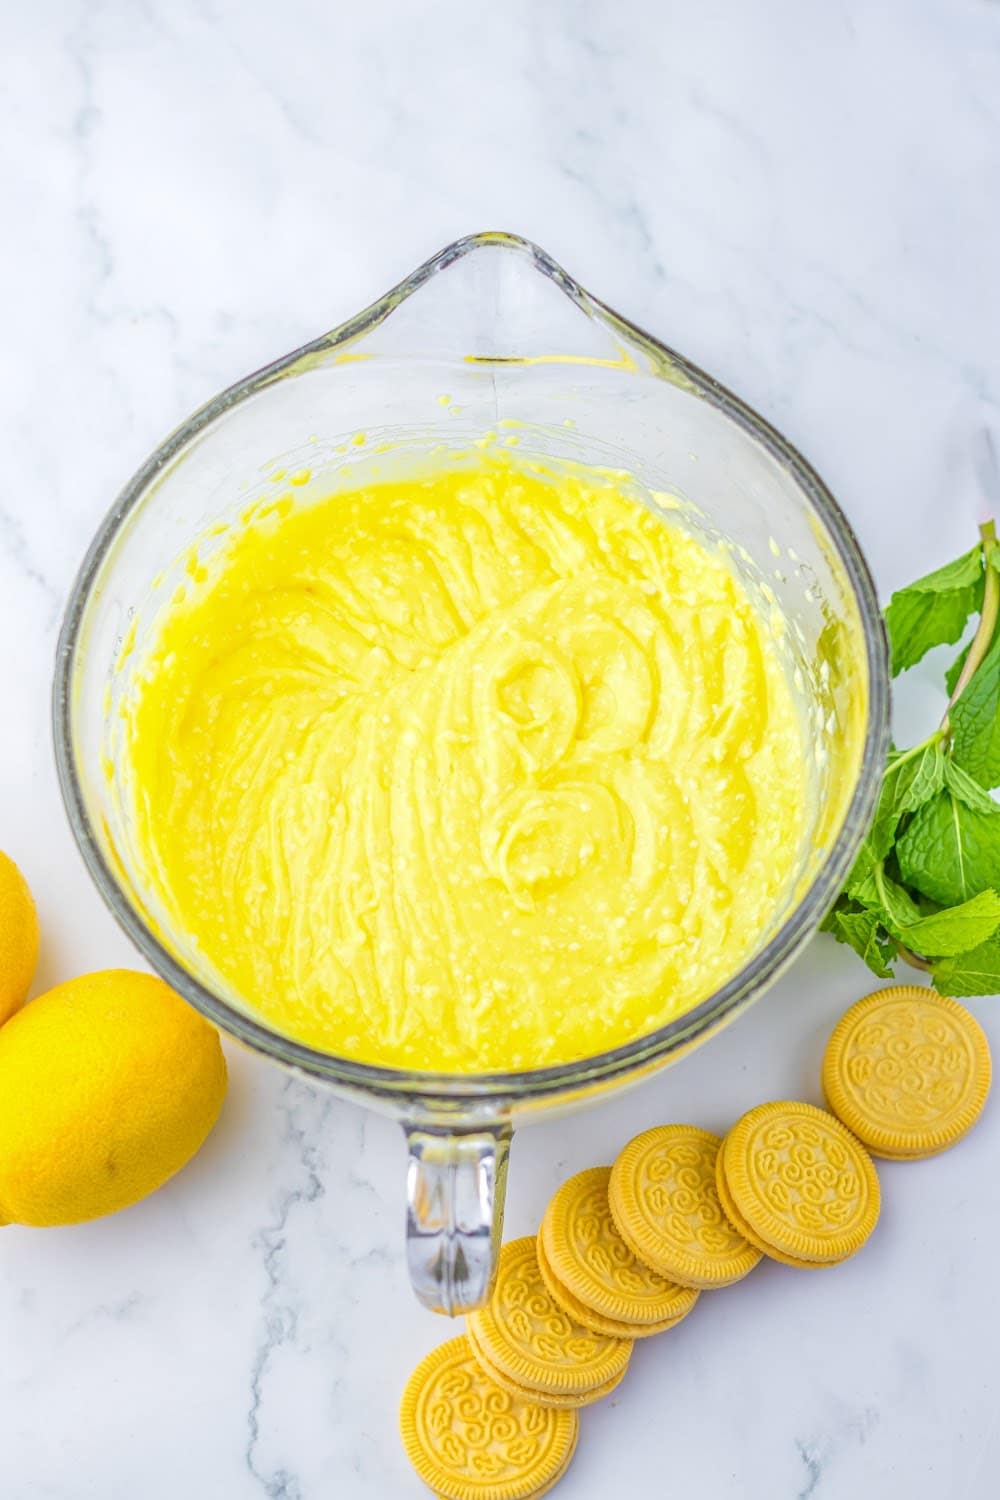 The lemon cream cheese mixture in a clear glass batter bowl.